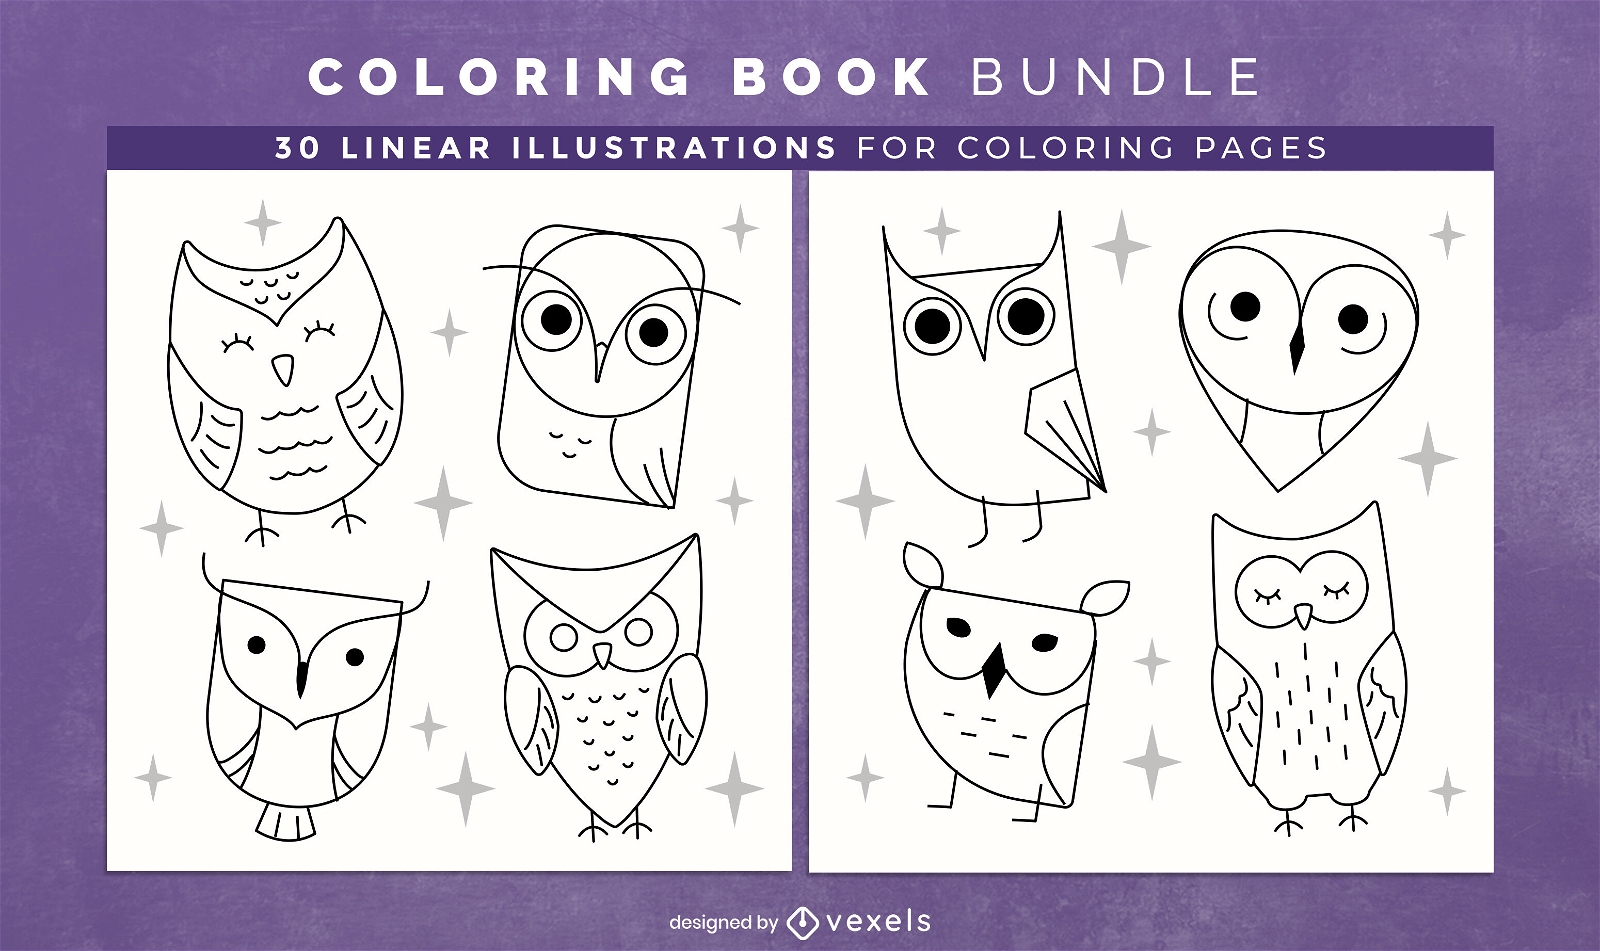 Owls characters coloring book pages design